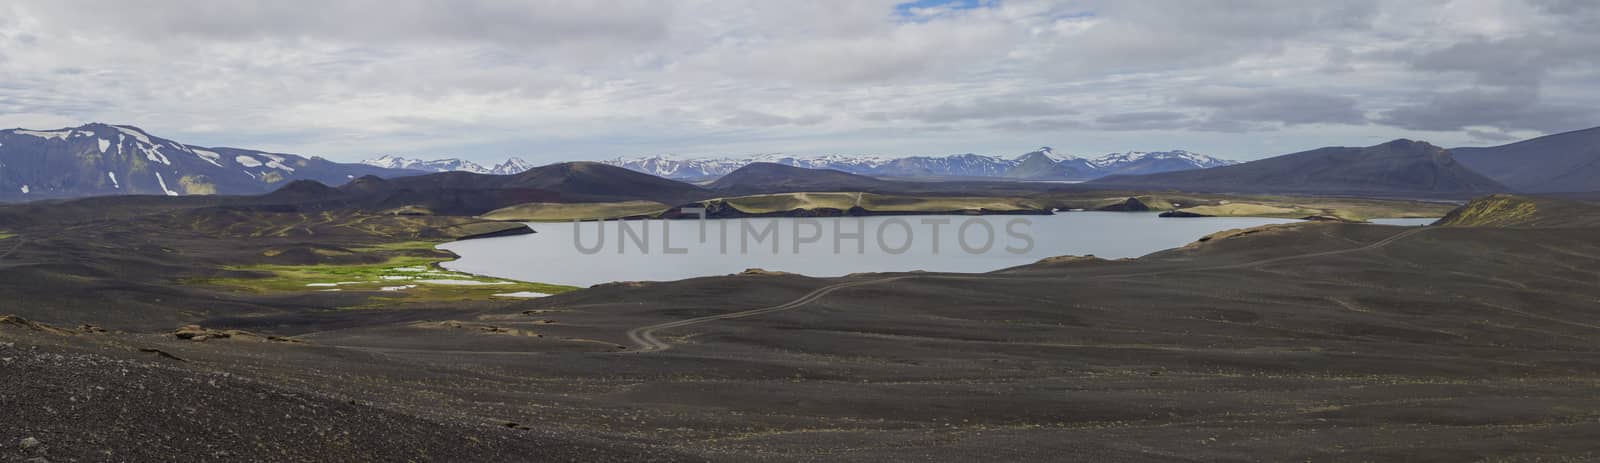 Colorful wide panorama, panoramic view on landscape with volcanic snow covered mountains and crater lakes and dirty mountain roads in Veidivotn area, central Iceland highlands in the middle of black lava desert